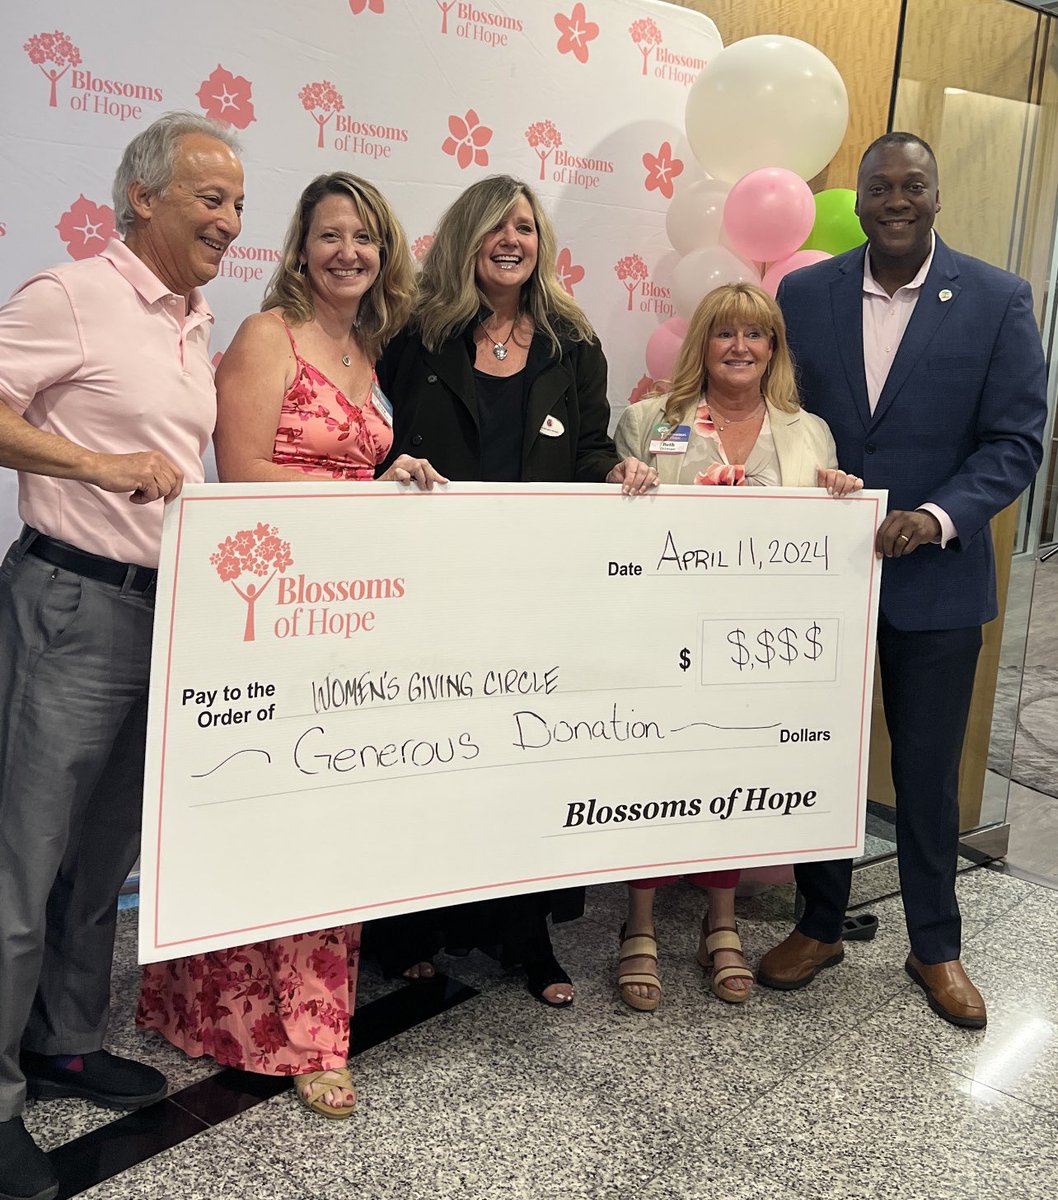 Thank you @blossoms_of_hope for your support, your partnership, and all you do for our community! It was wonderful toasting your new offices, and toasting #giving in #hocomd 🌸 #givingcircles #collectivegiving #strongertogether